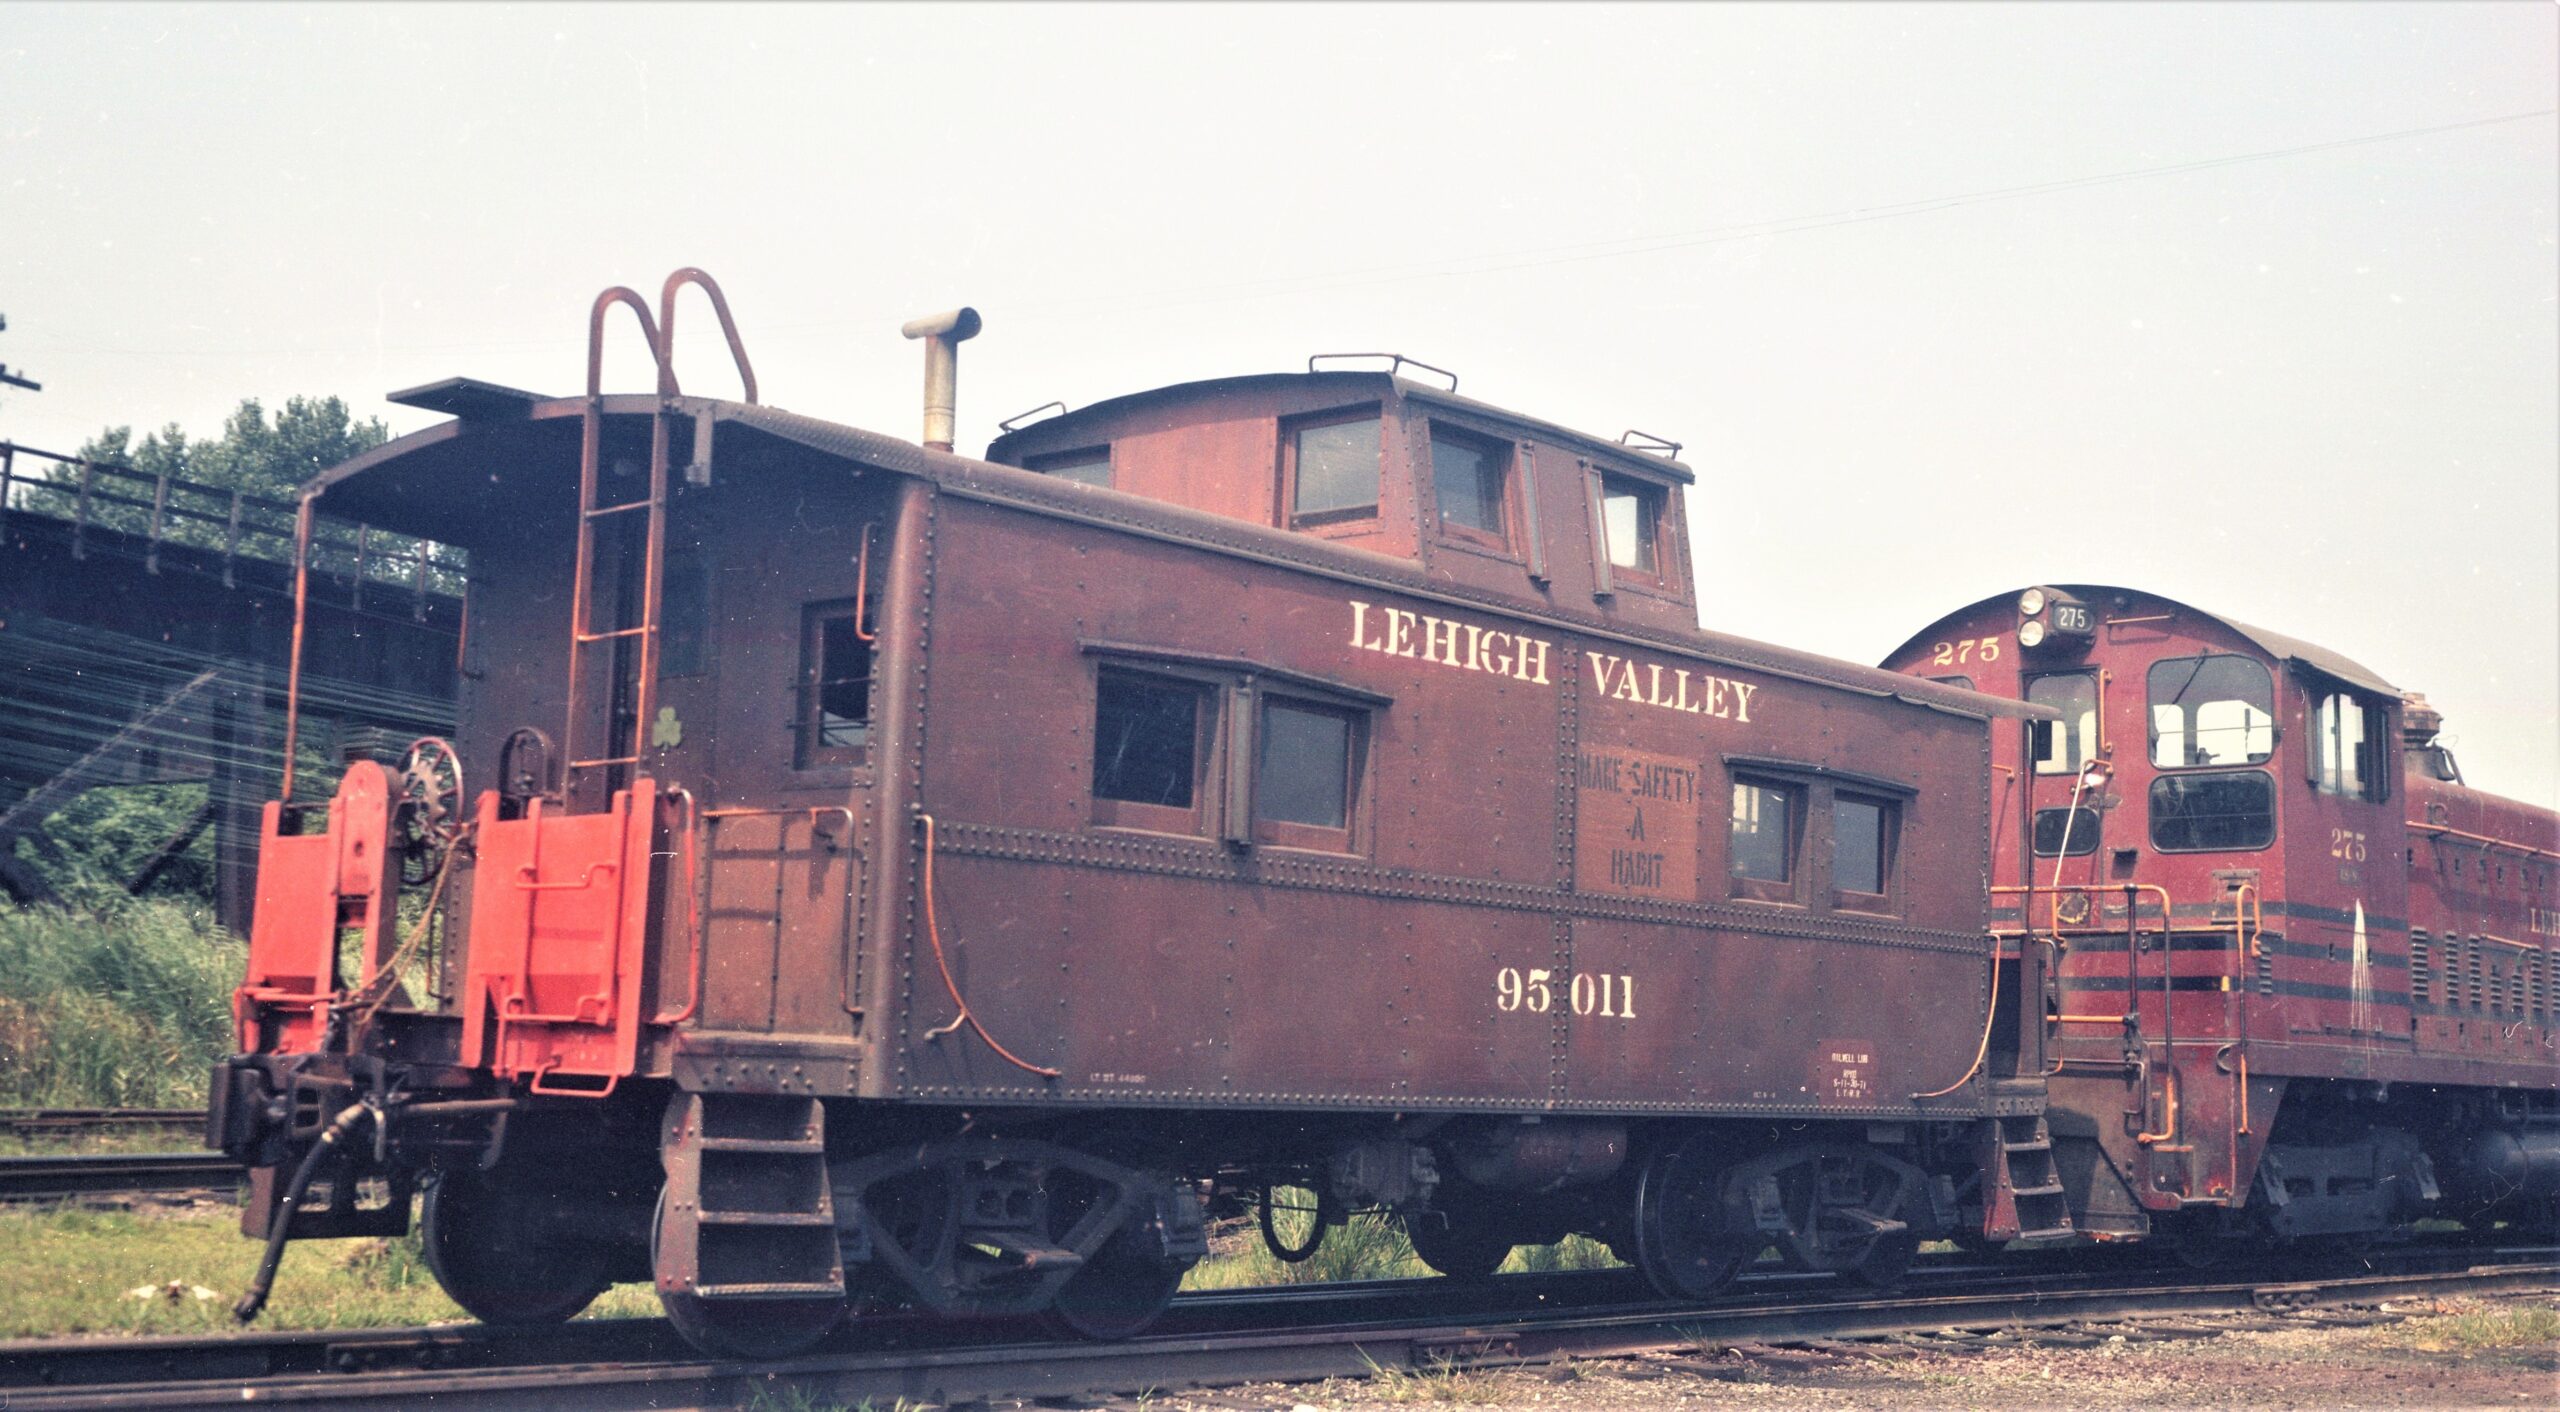 Lehigh Valley | Jersey City, New Jersey | Caboose #95011 | August 19, 1973